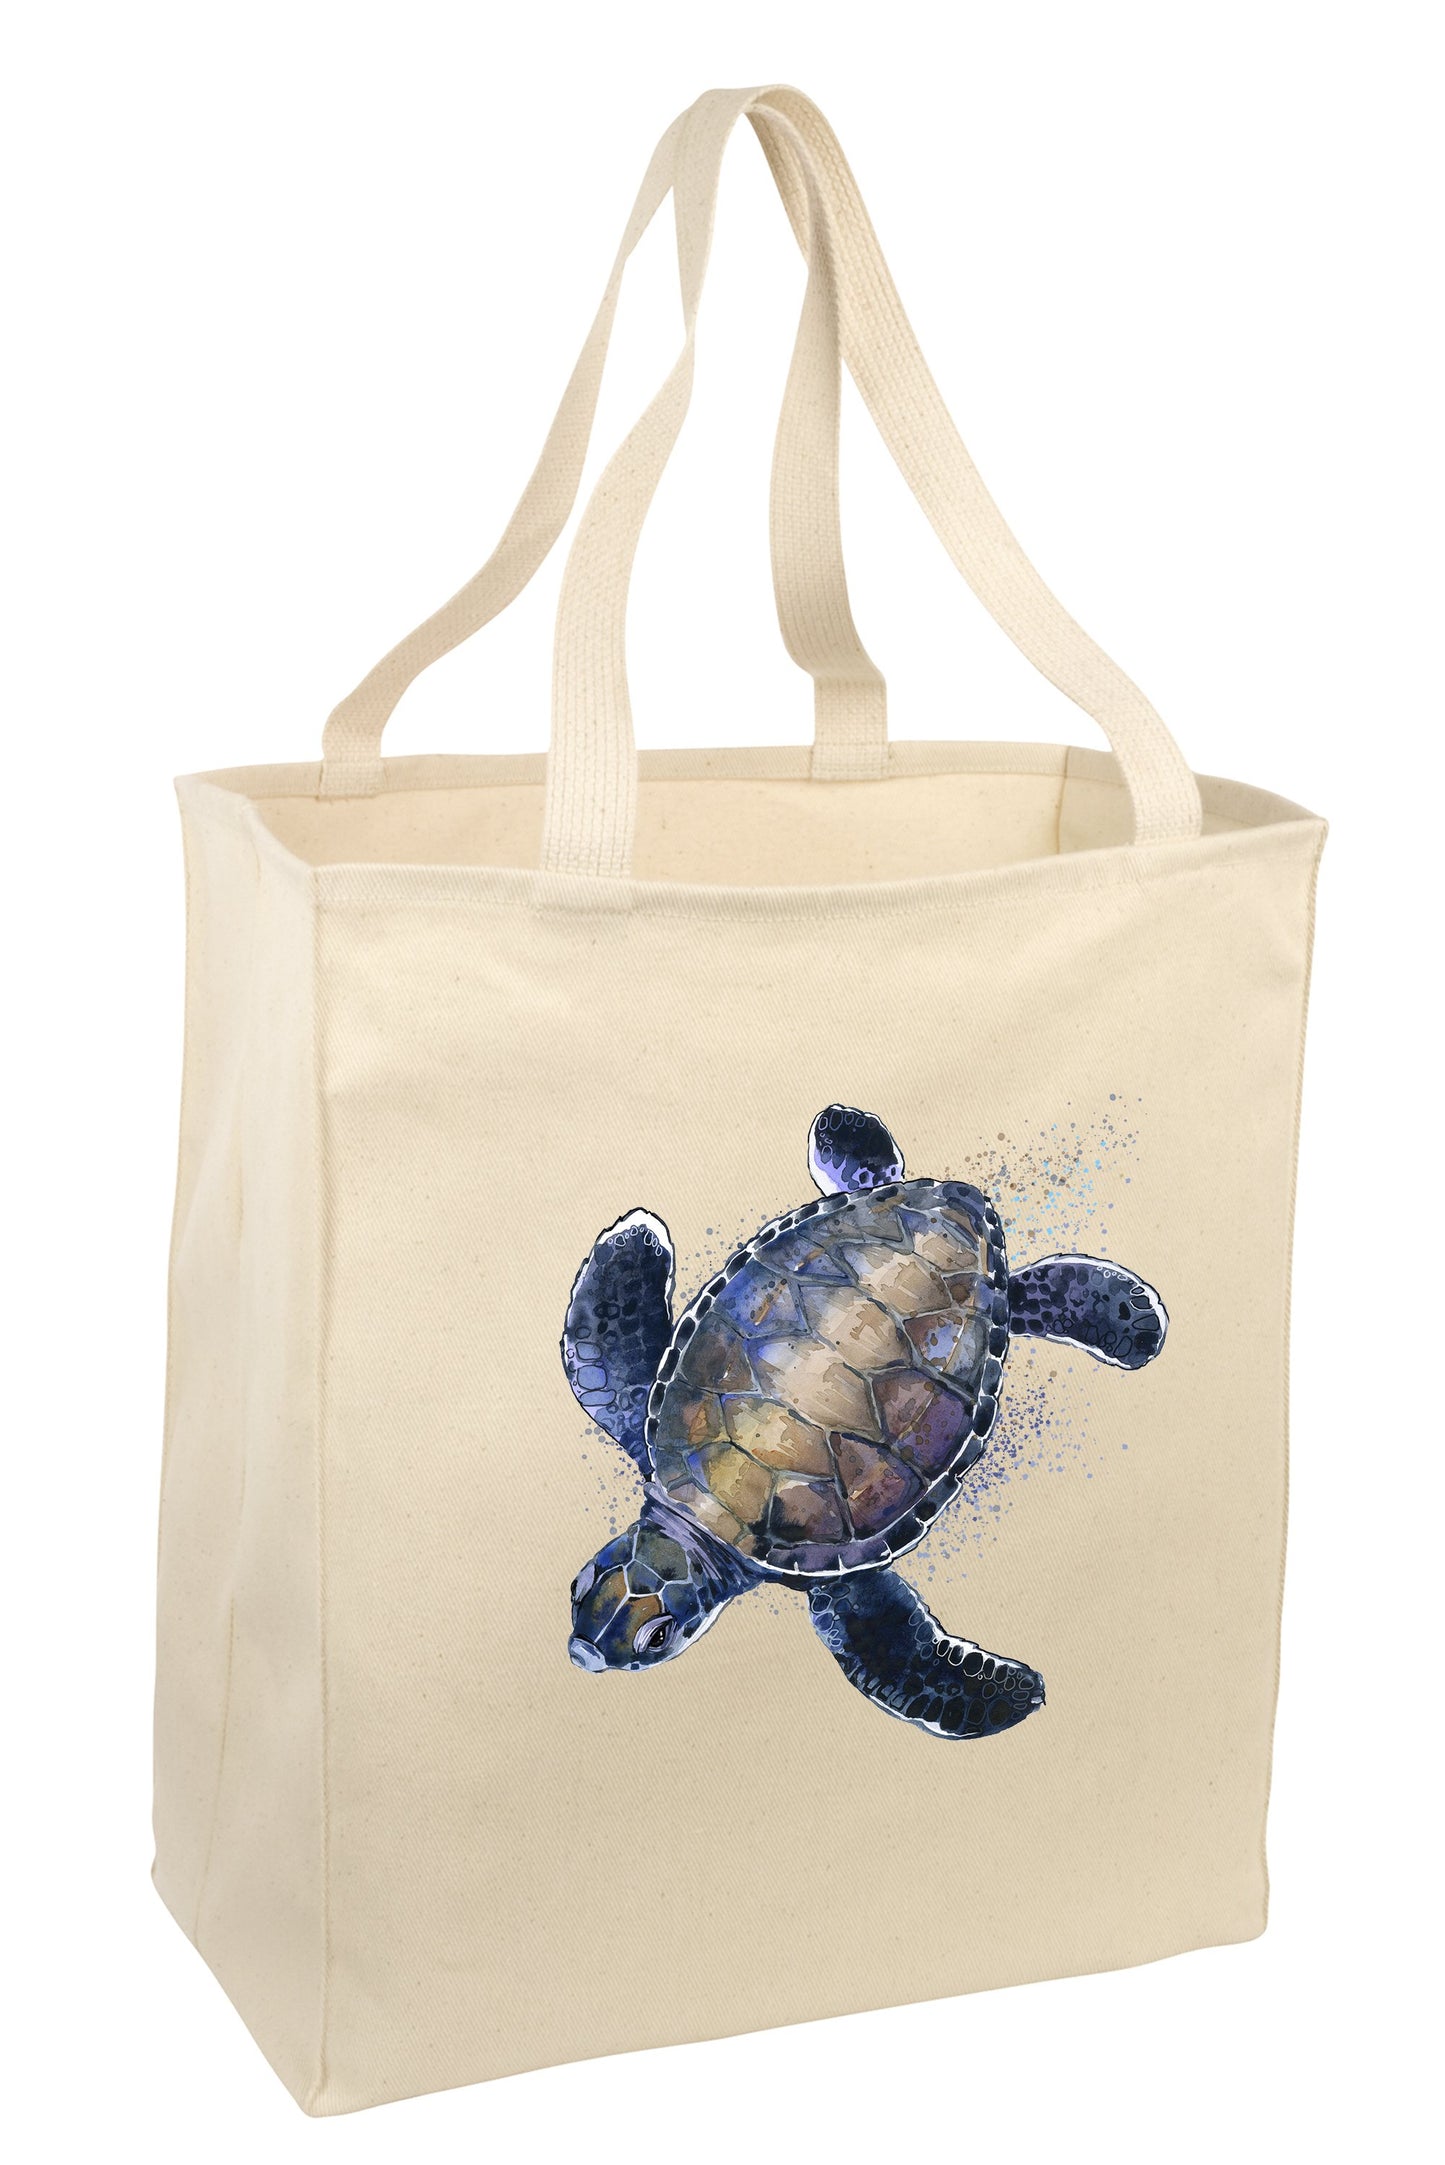 Over the Shoulder Beach Summer Tote Bag. Durable 100% Cotton and 22" Long Handle Shopping Bag. (Sea Turtle)